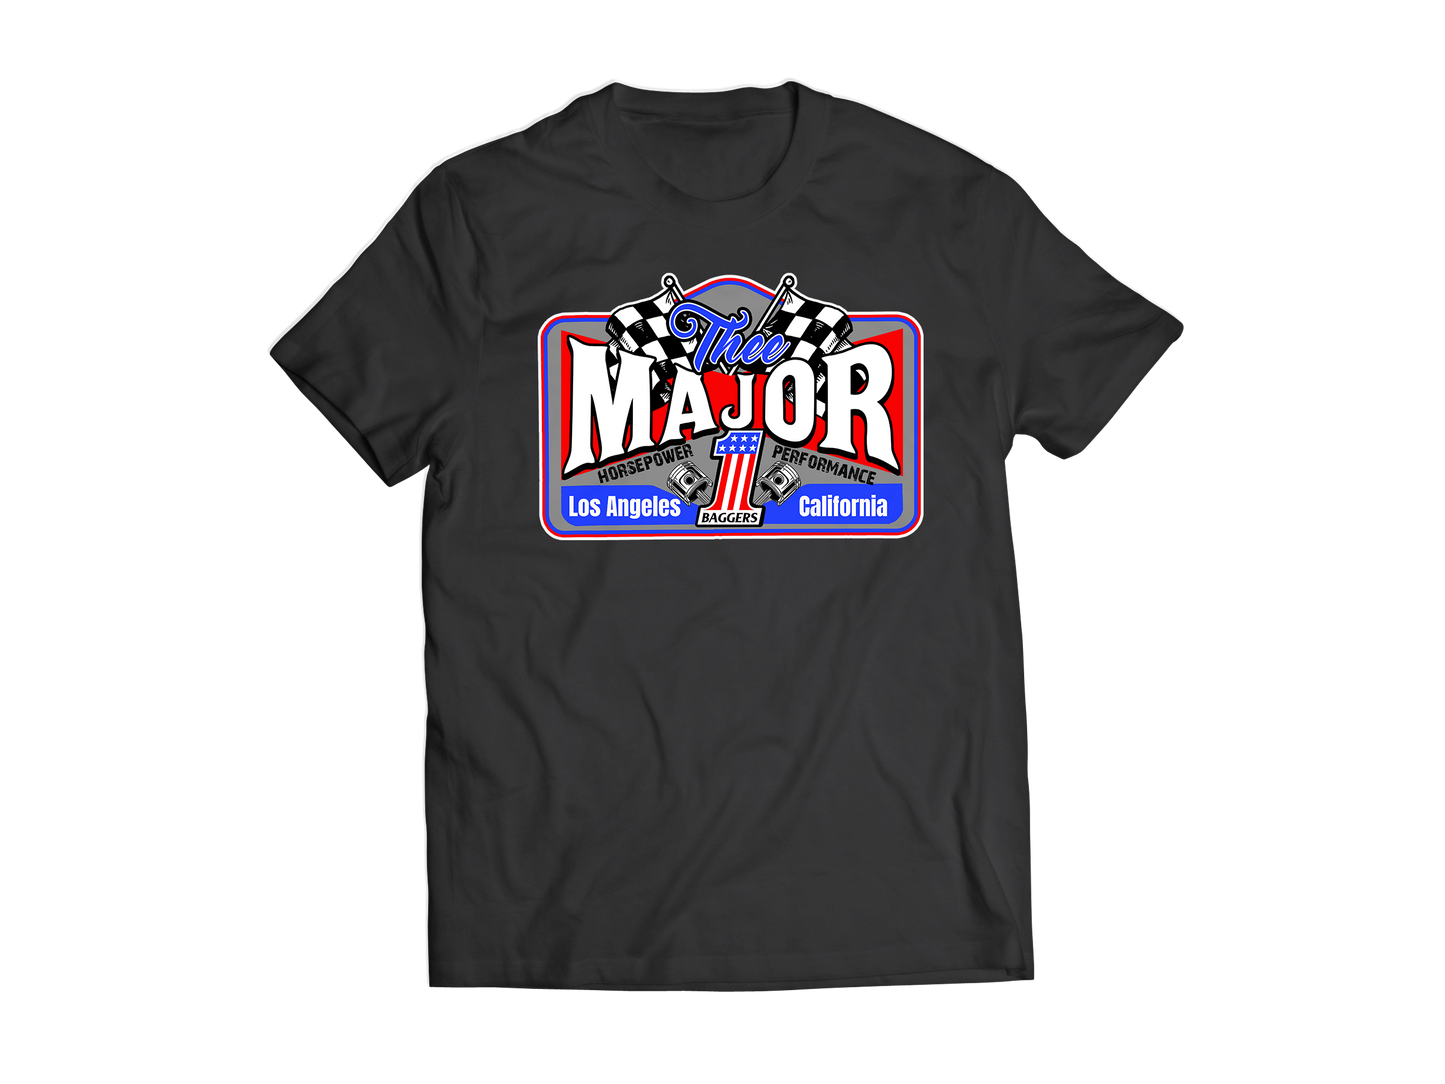 Thee Major